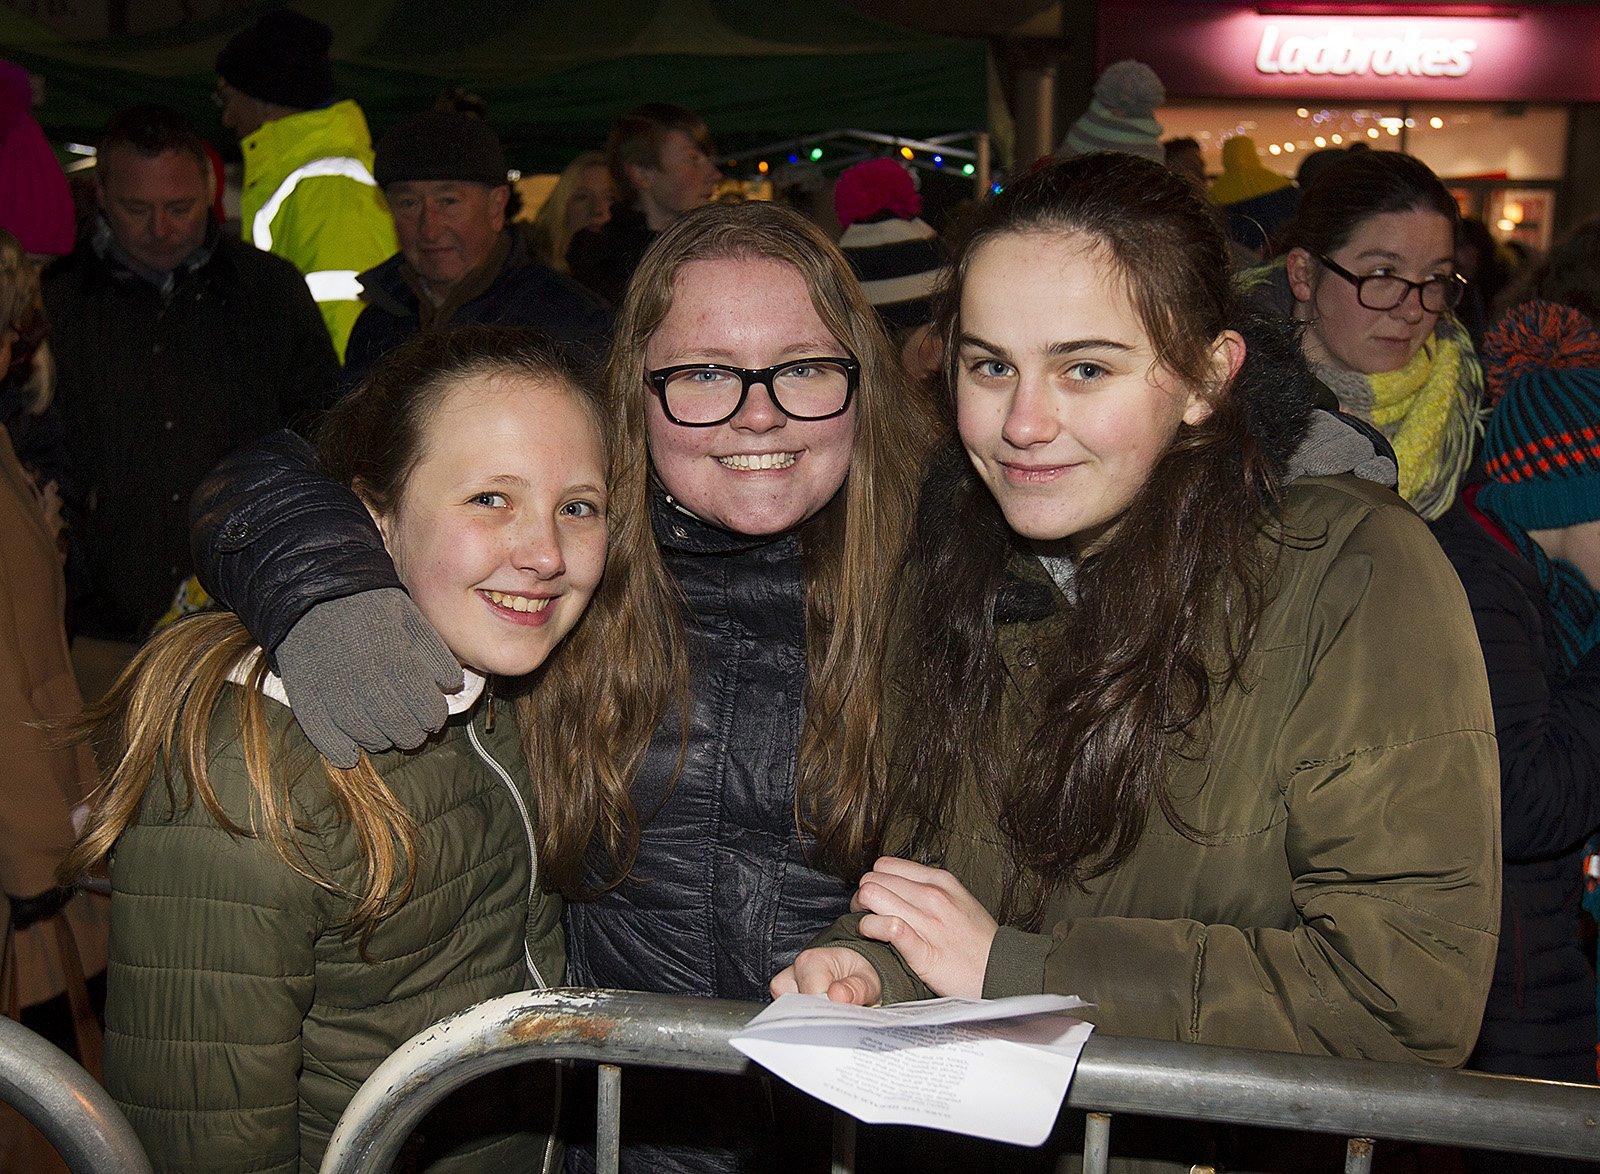 Waiting for Santa at Hawick, Grace Collinson, Zara Gilfether and Amy O'Rourke